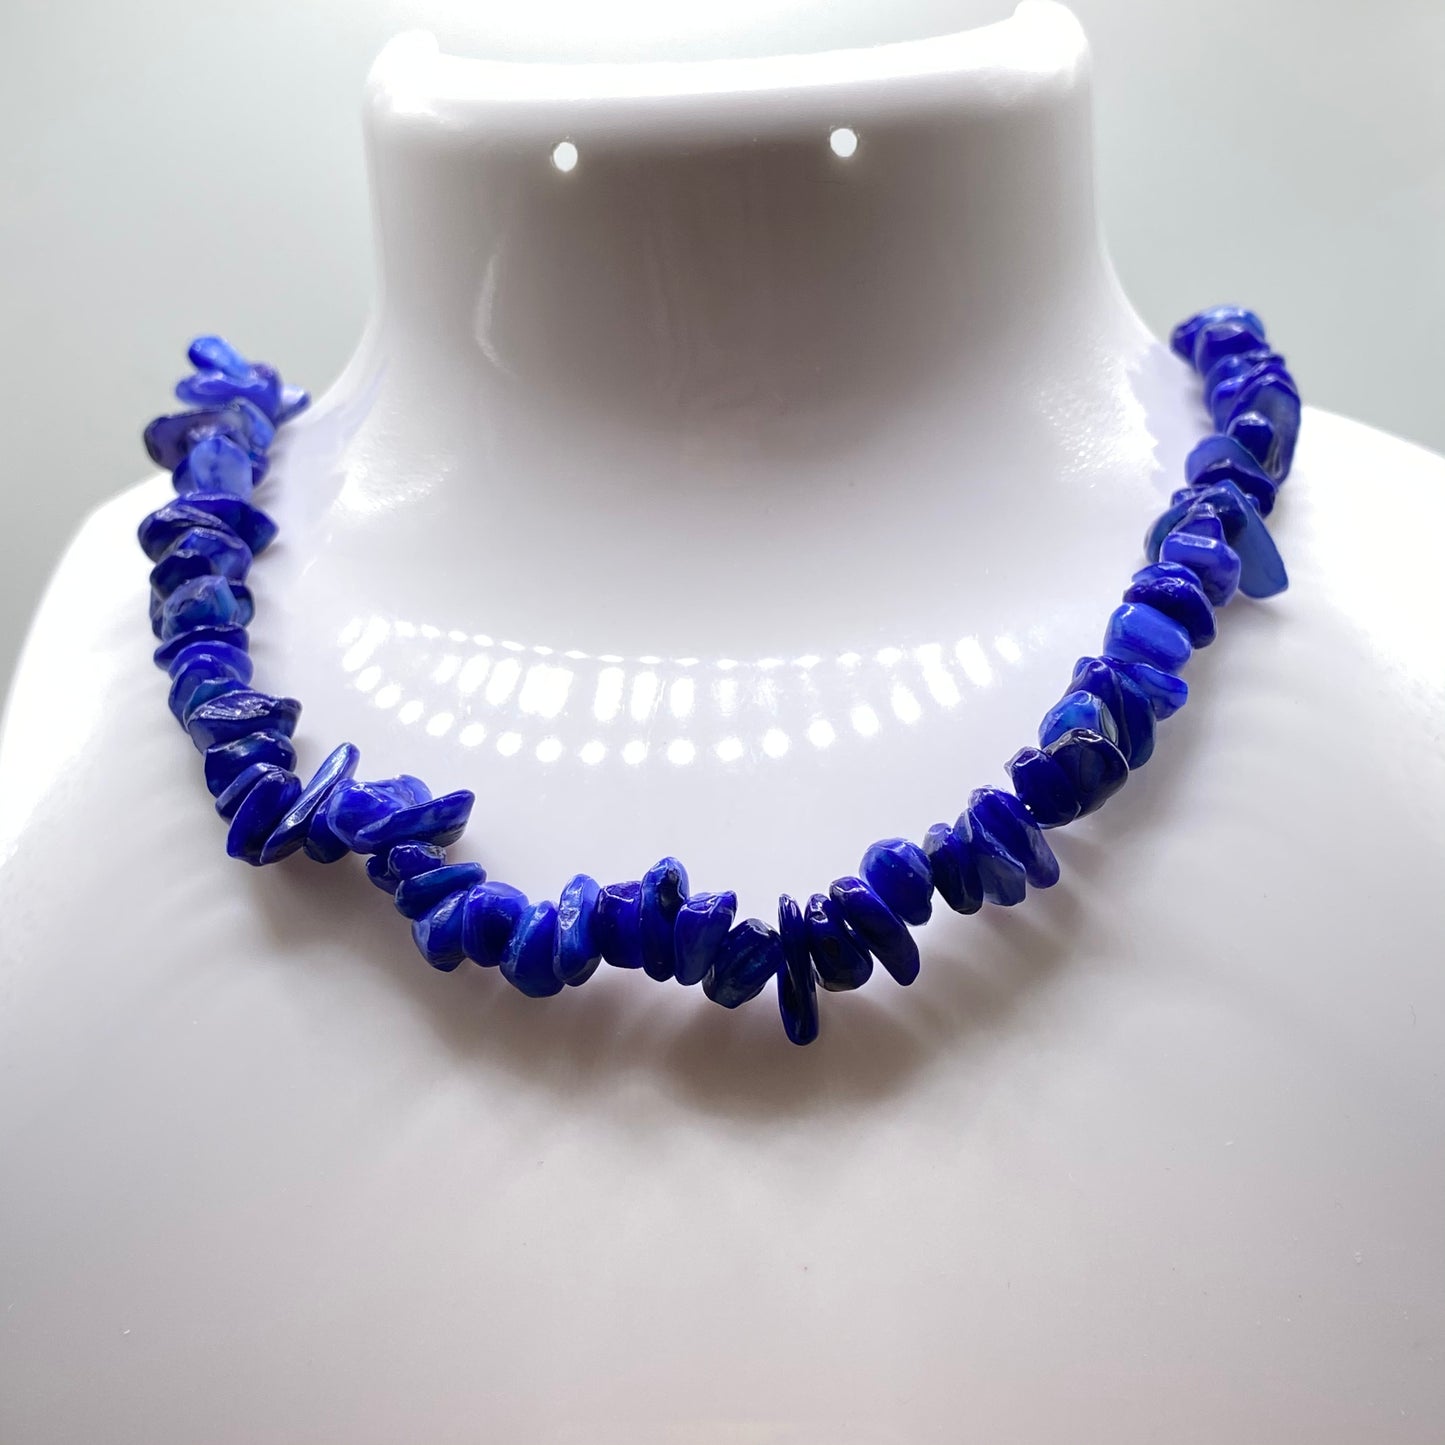 Blue Sodalite Crystal Necklace